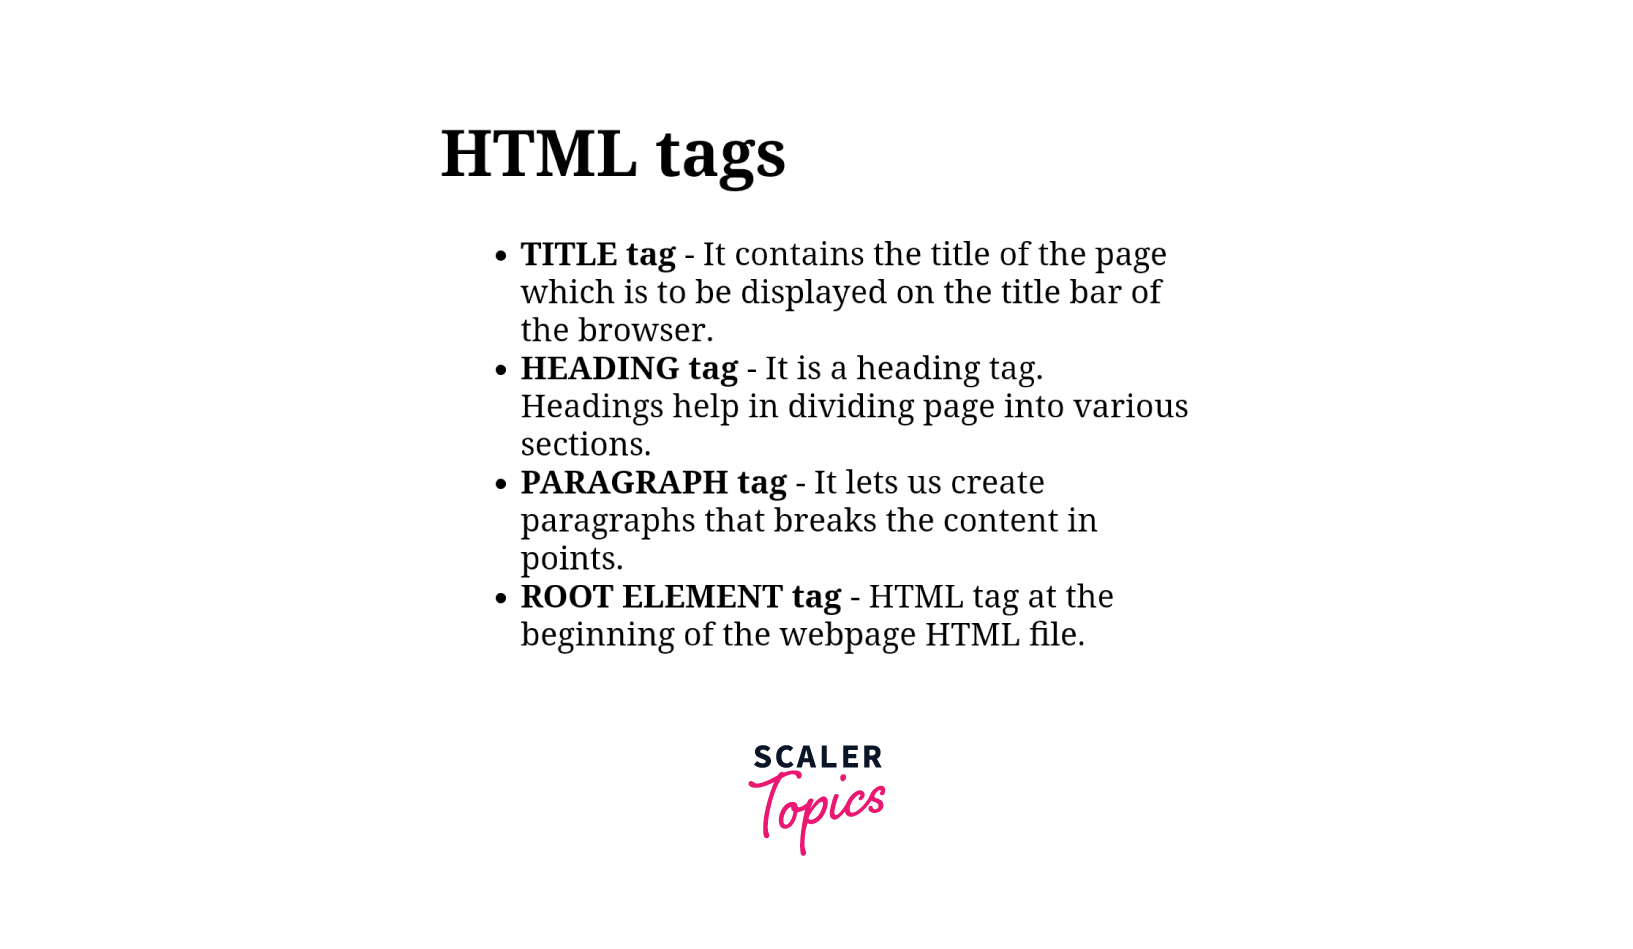 function of tags of HTML